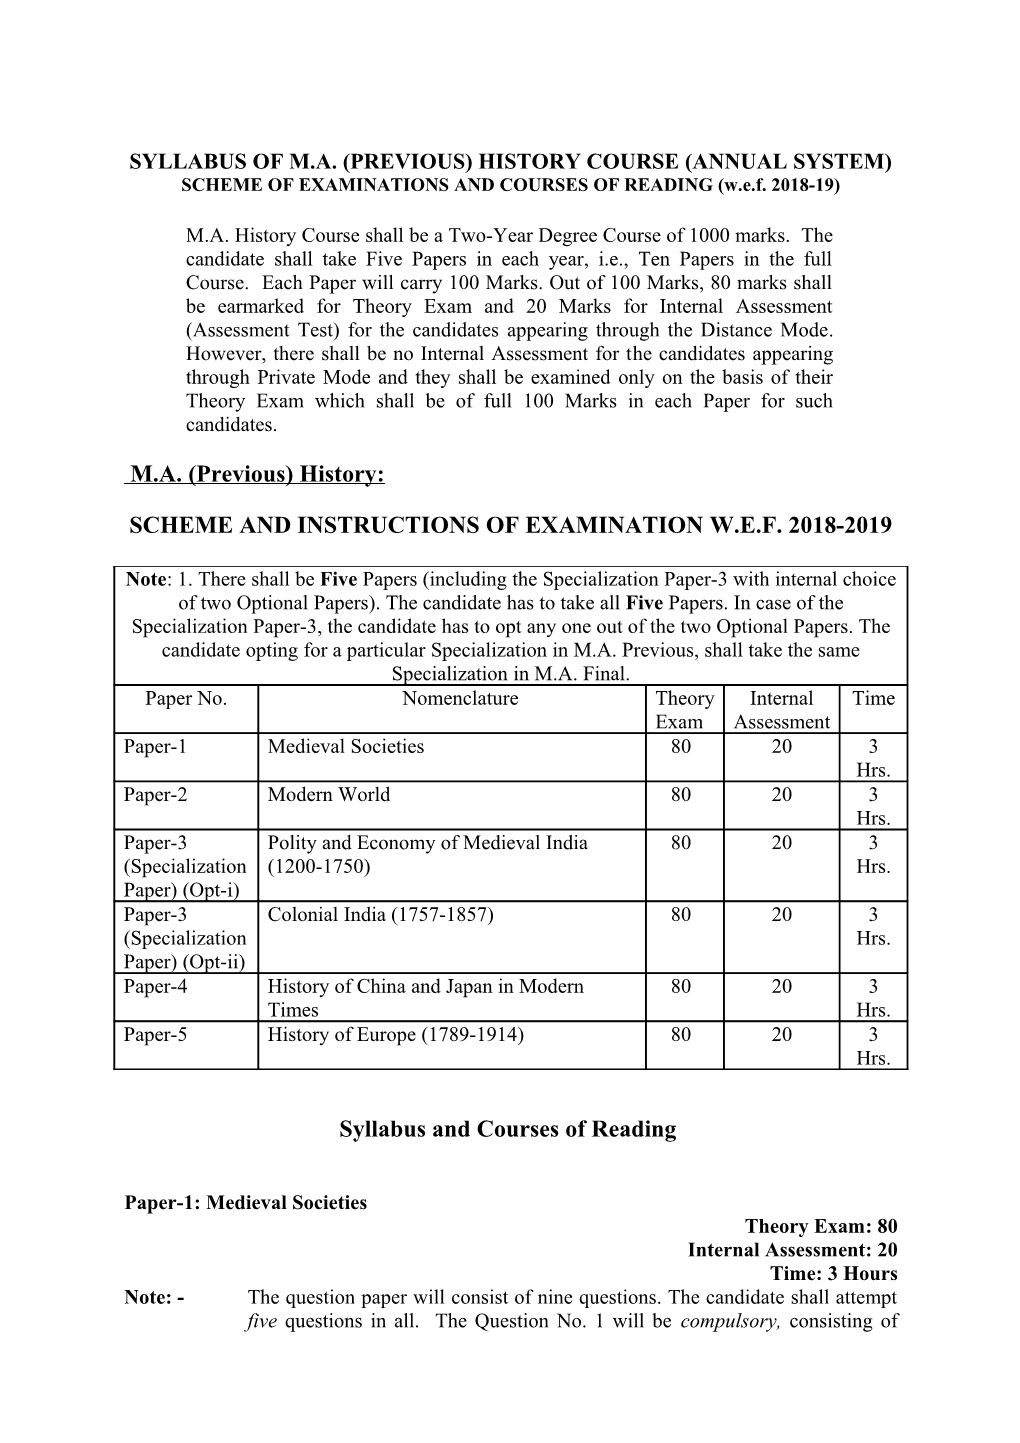 Syllabus of M.A. (Previous) History Course (Annual System)